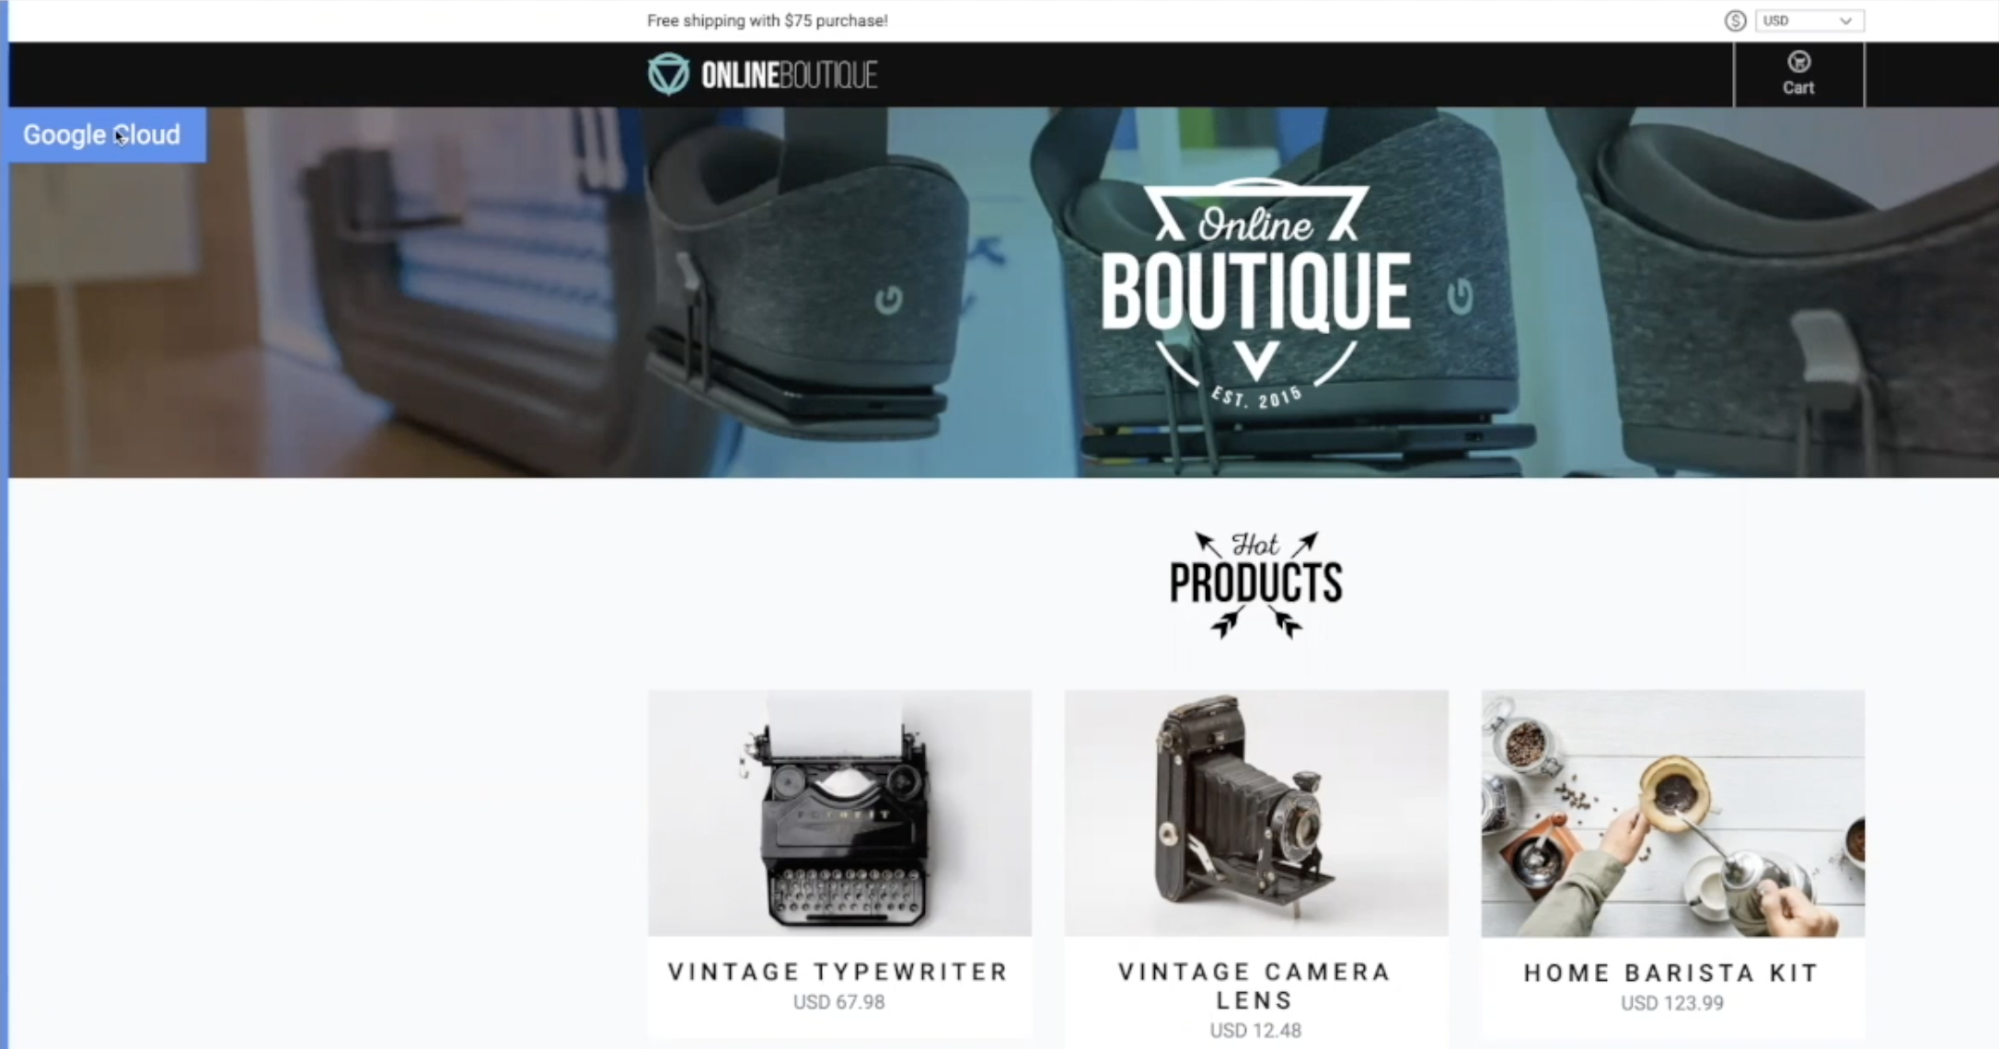 Online Boutique Web Page with Banner